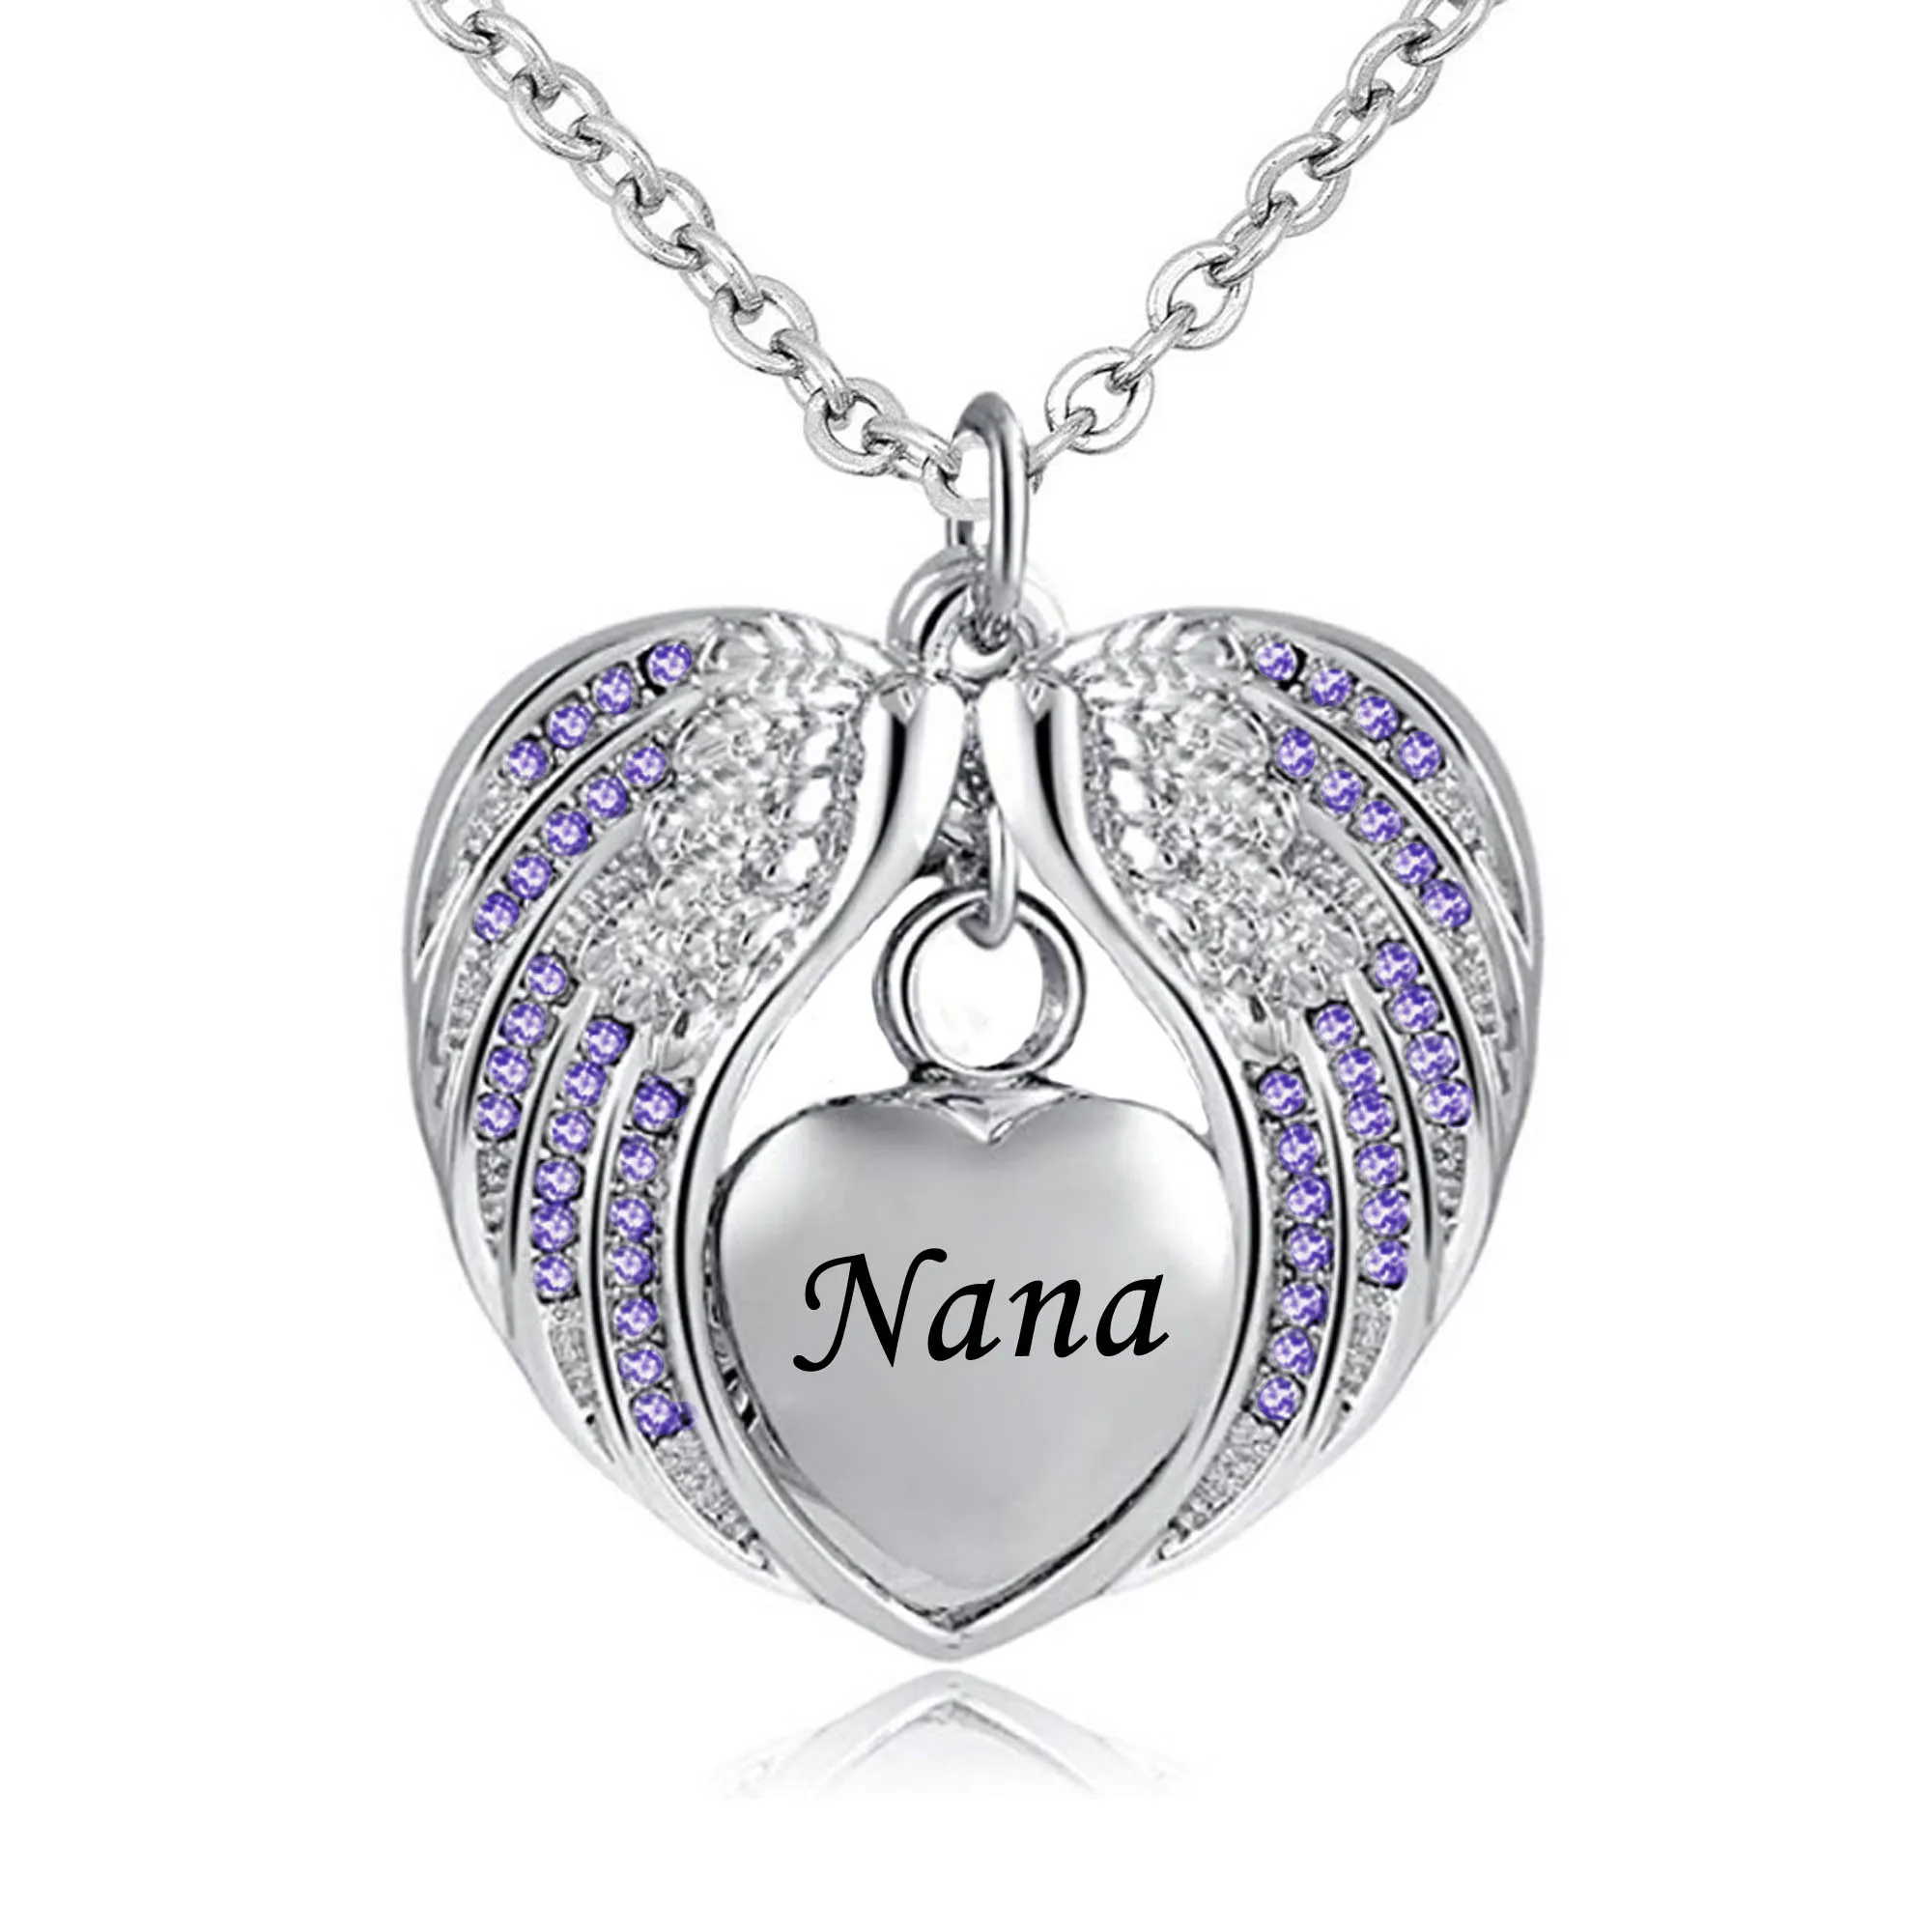 Cremation Jewelry with Angel Wing Urn Necklace for Ashes Birthstone Pendant Holder Heart Memorial Keepsake -Nana